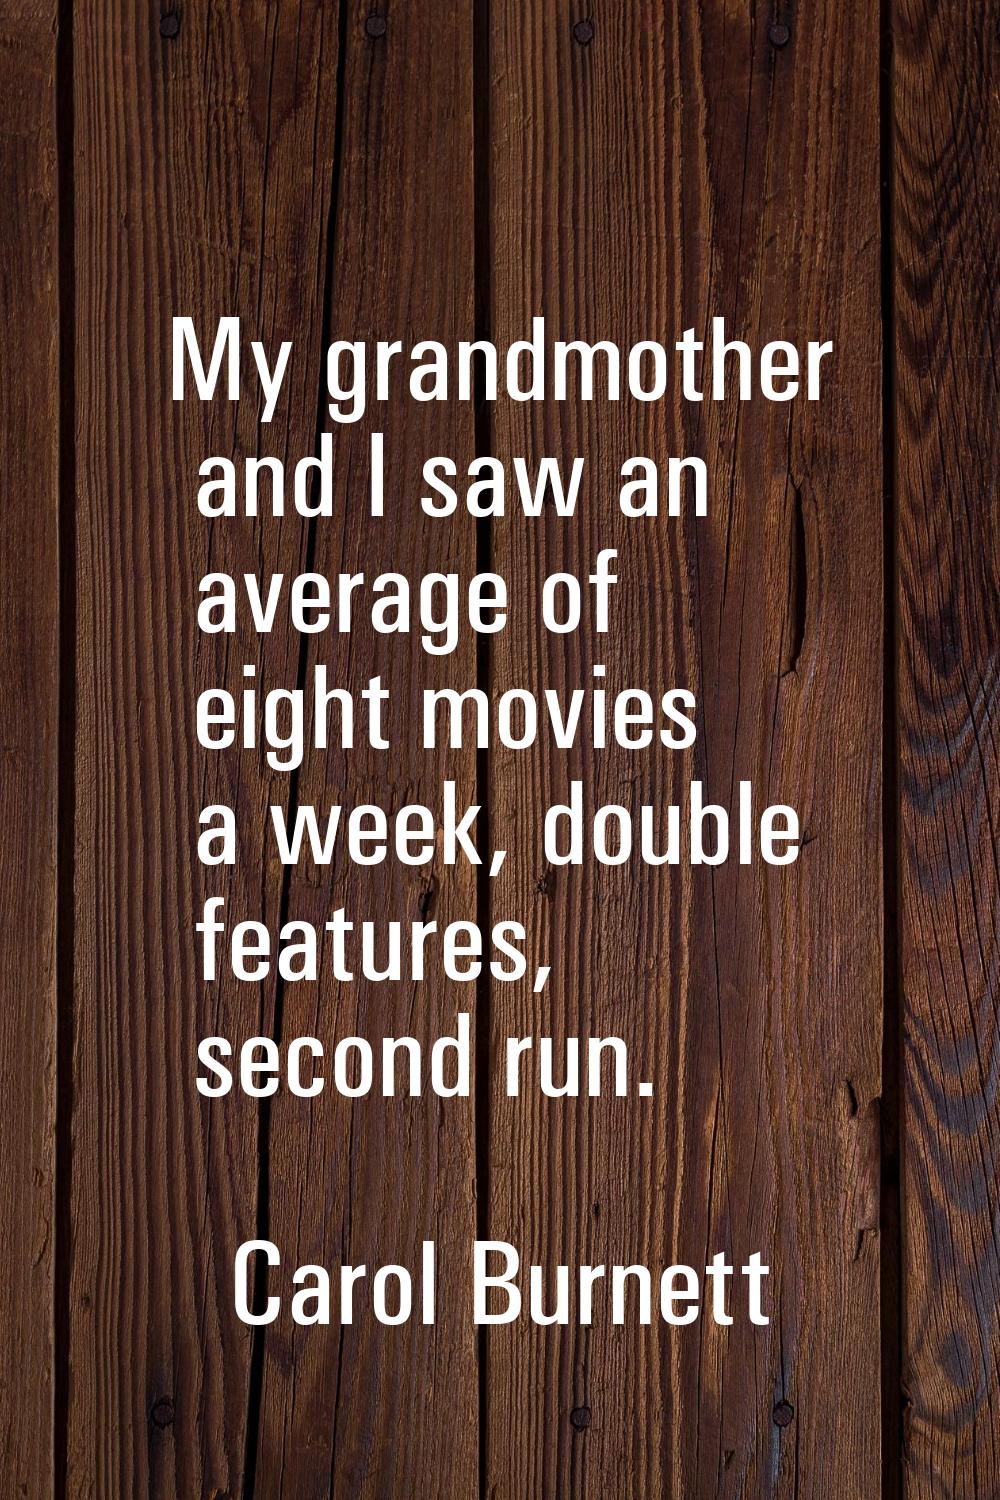 My grandmother and I saw an average of eight movies a week, double features, second run.